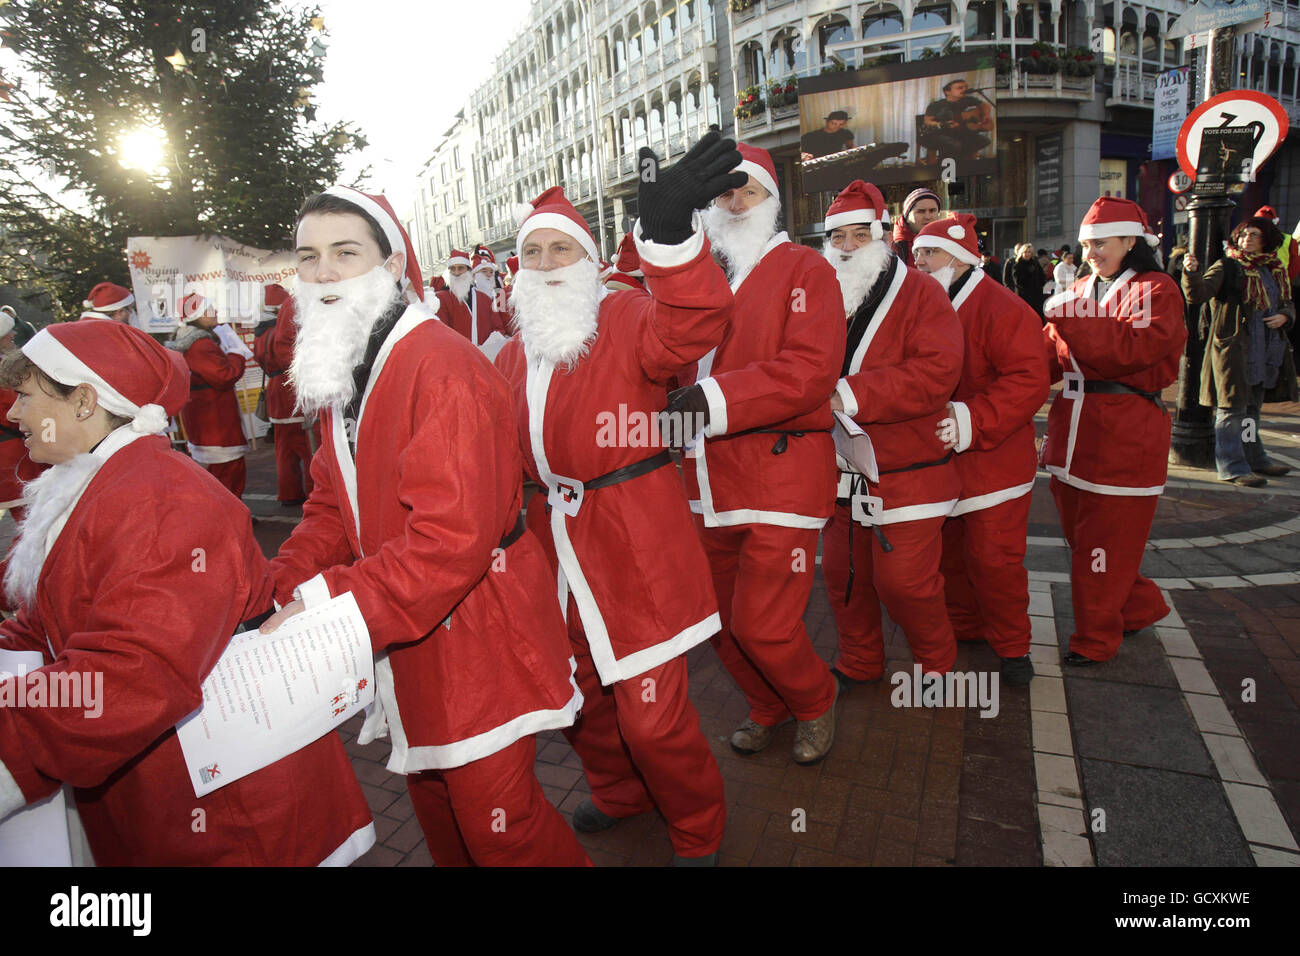 Some of the 100 singing Santa members of the website community www.movieextras.ie on Dublin's Grafton Street, raising money for 4 charities: St Vincent de Paul, AWARE, Kidane Mehret and St Lukes Hospital. Stock Photo